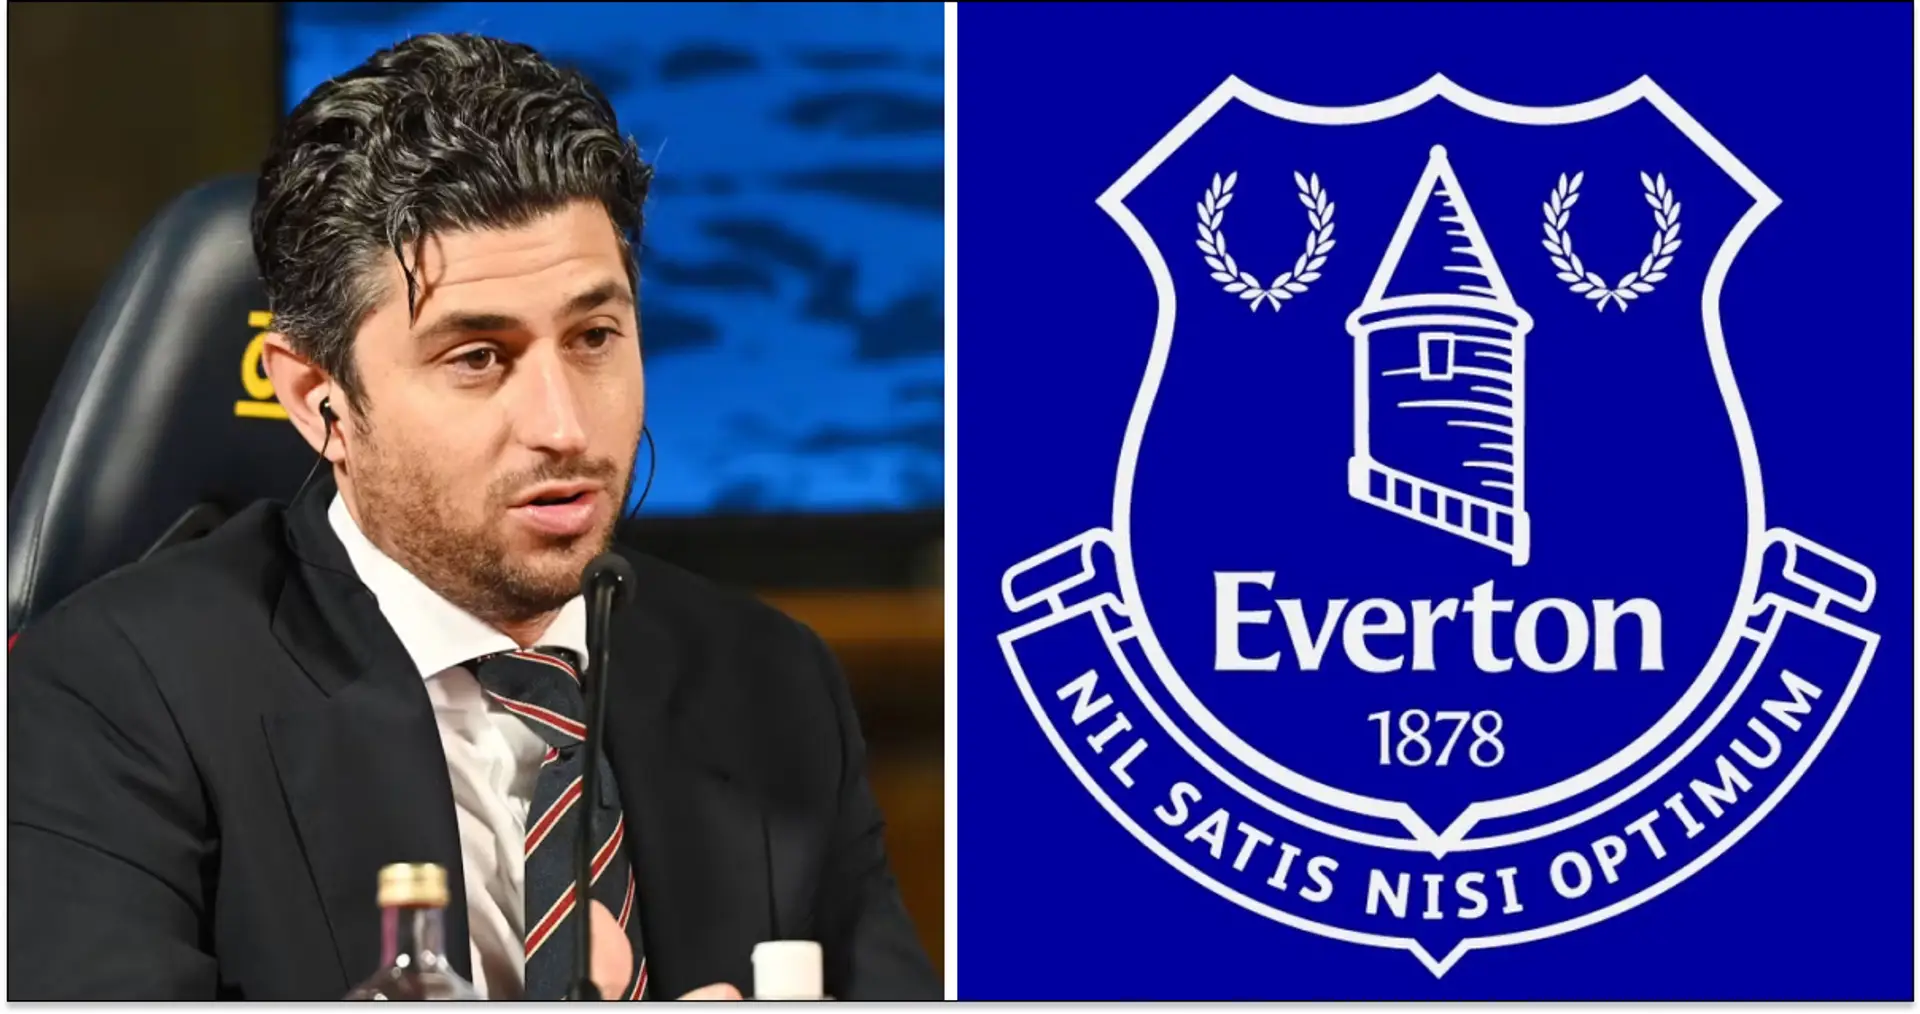 Everton new owners accused of kidnapping and extortion, founder a drug trafficking convict